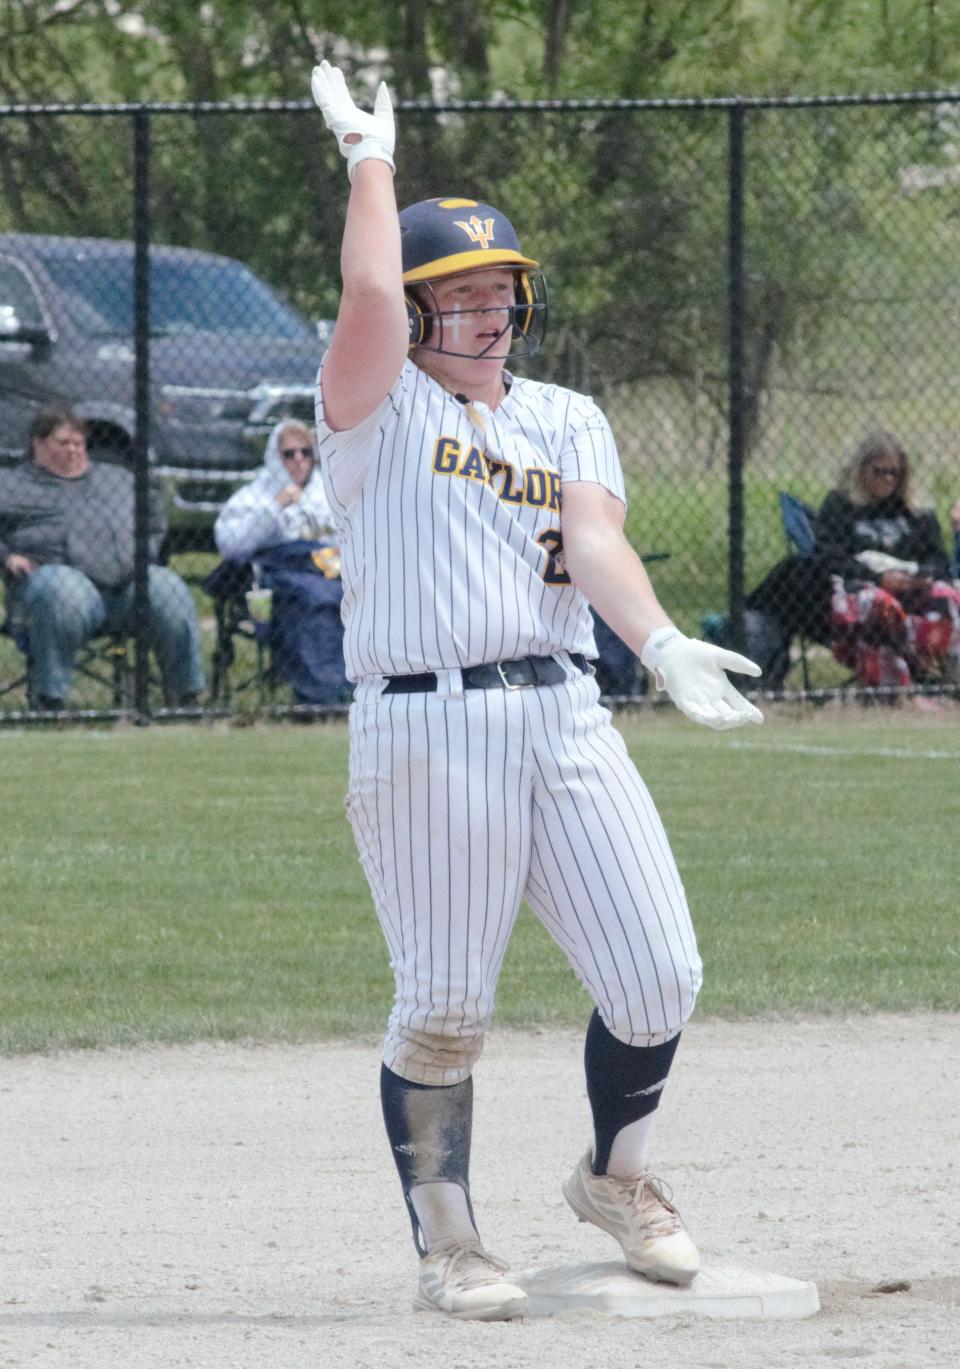 Taylor Moeggenberg celebrates after hitting a double during the MHSAA Division 2 district semifinal game with Gladwin on Saturday, June 4 at Petoskey High School.